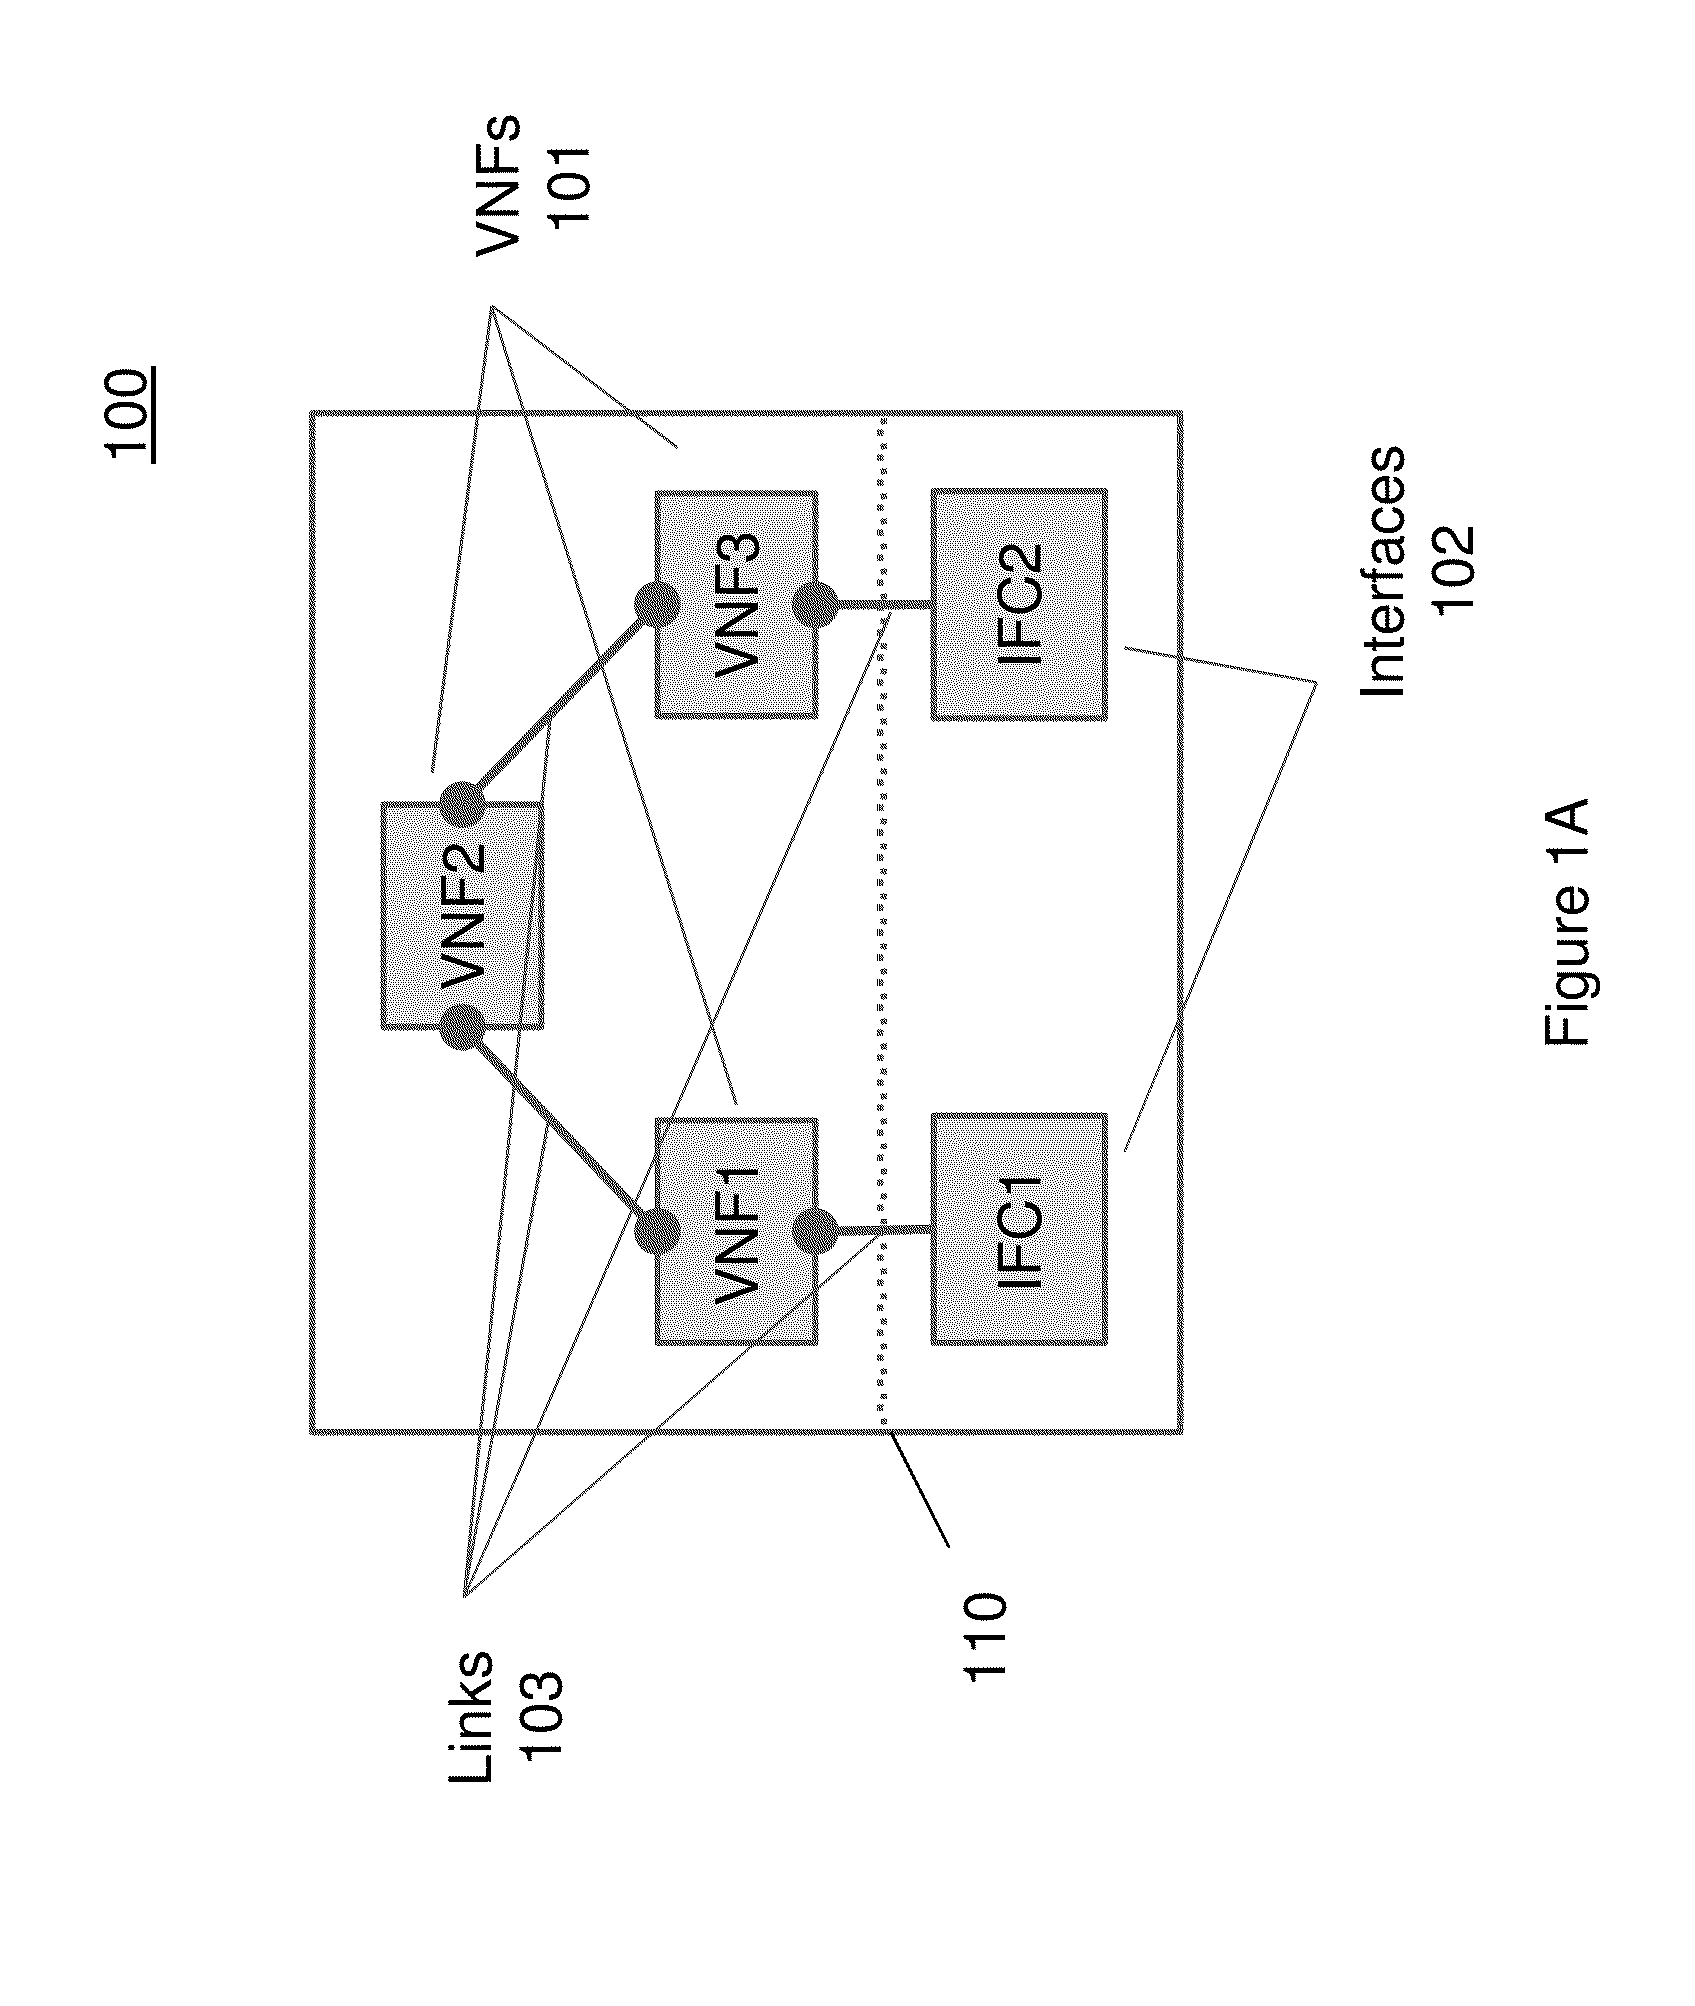 Method and system for managing interconnection of virtual network functions